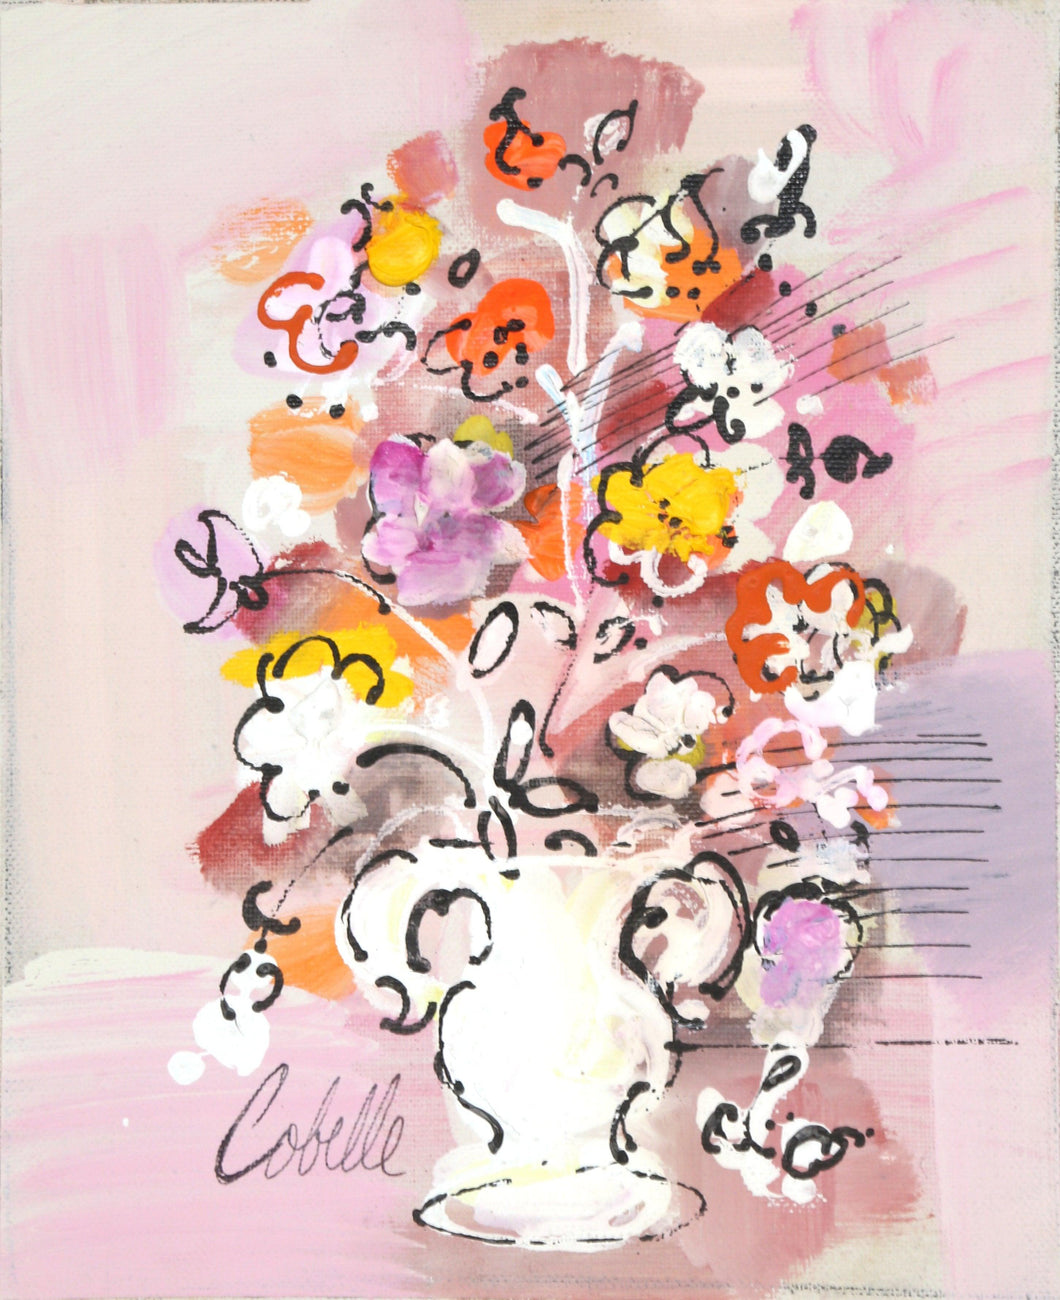 Vase with Flowers (Pink and White) Acrylic | Charles Cobelle,{{product.type}}